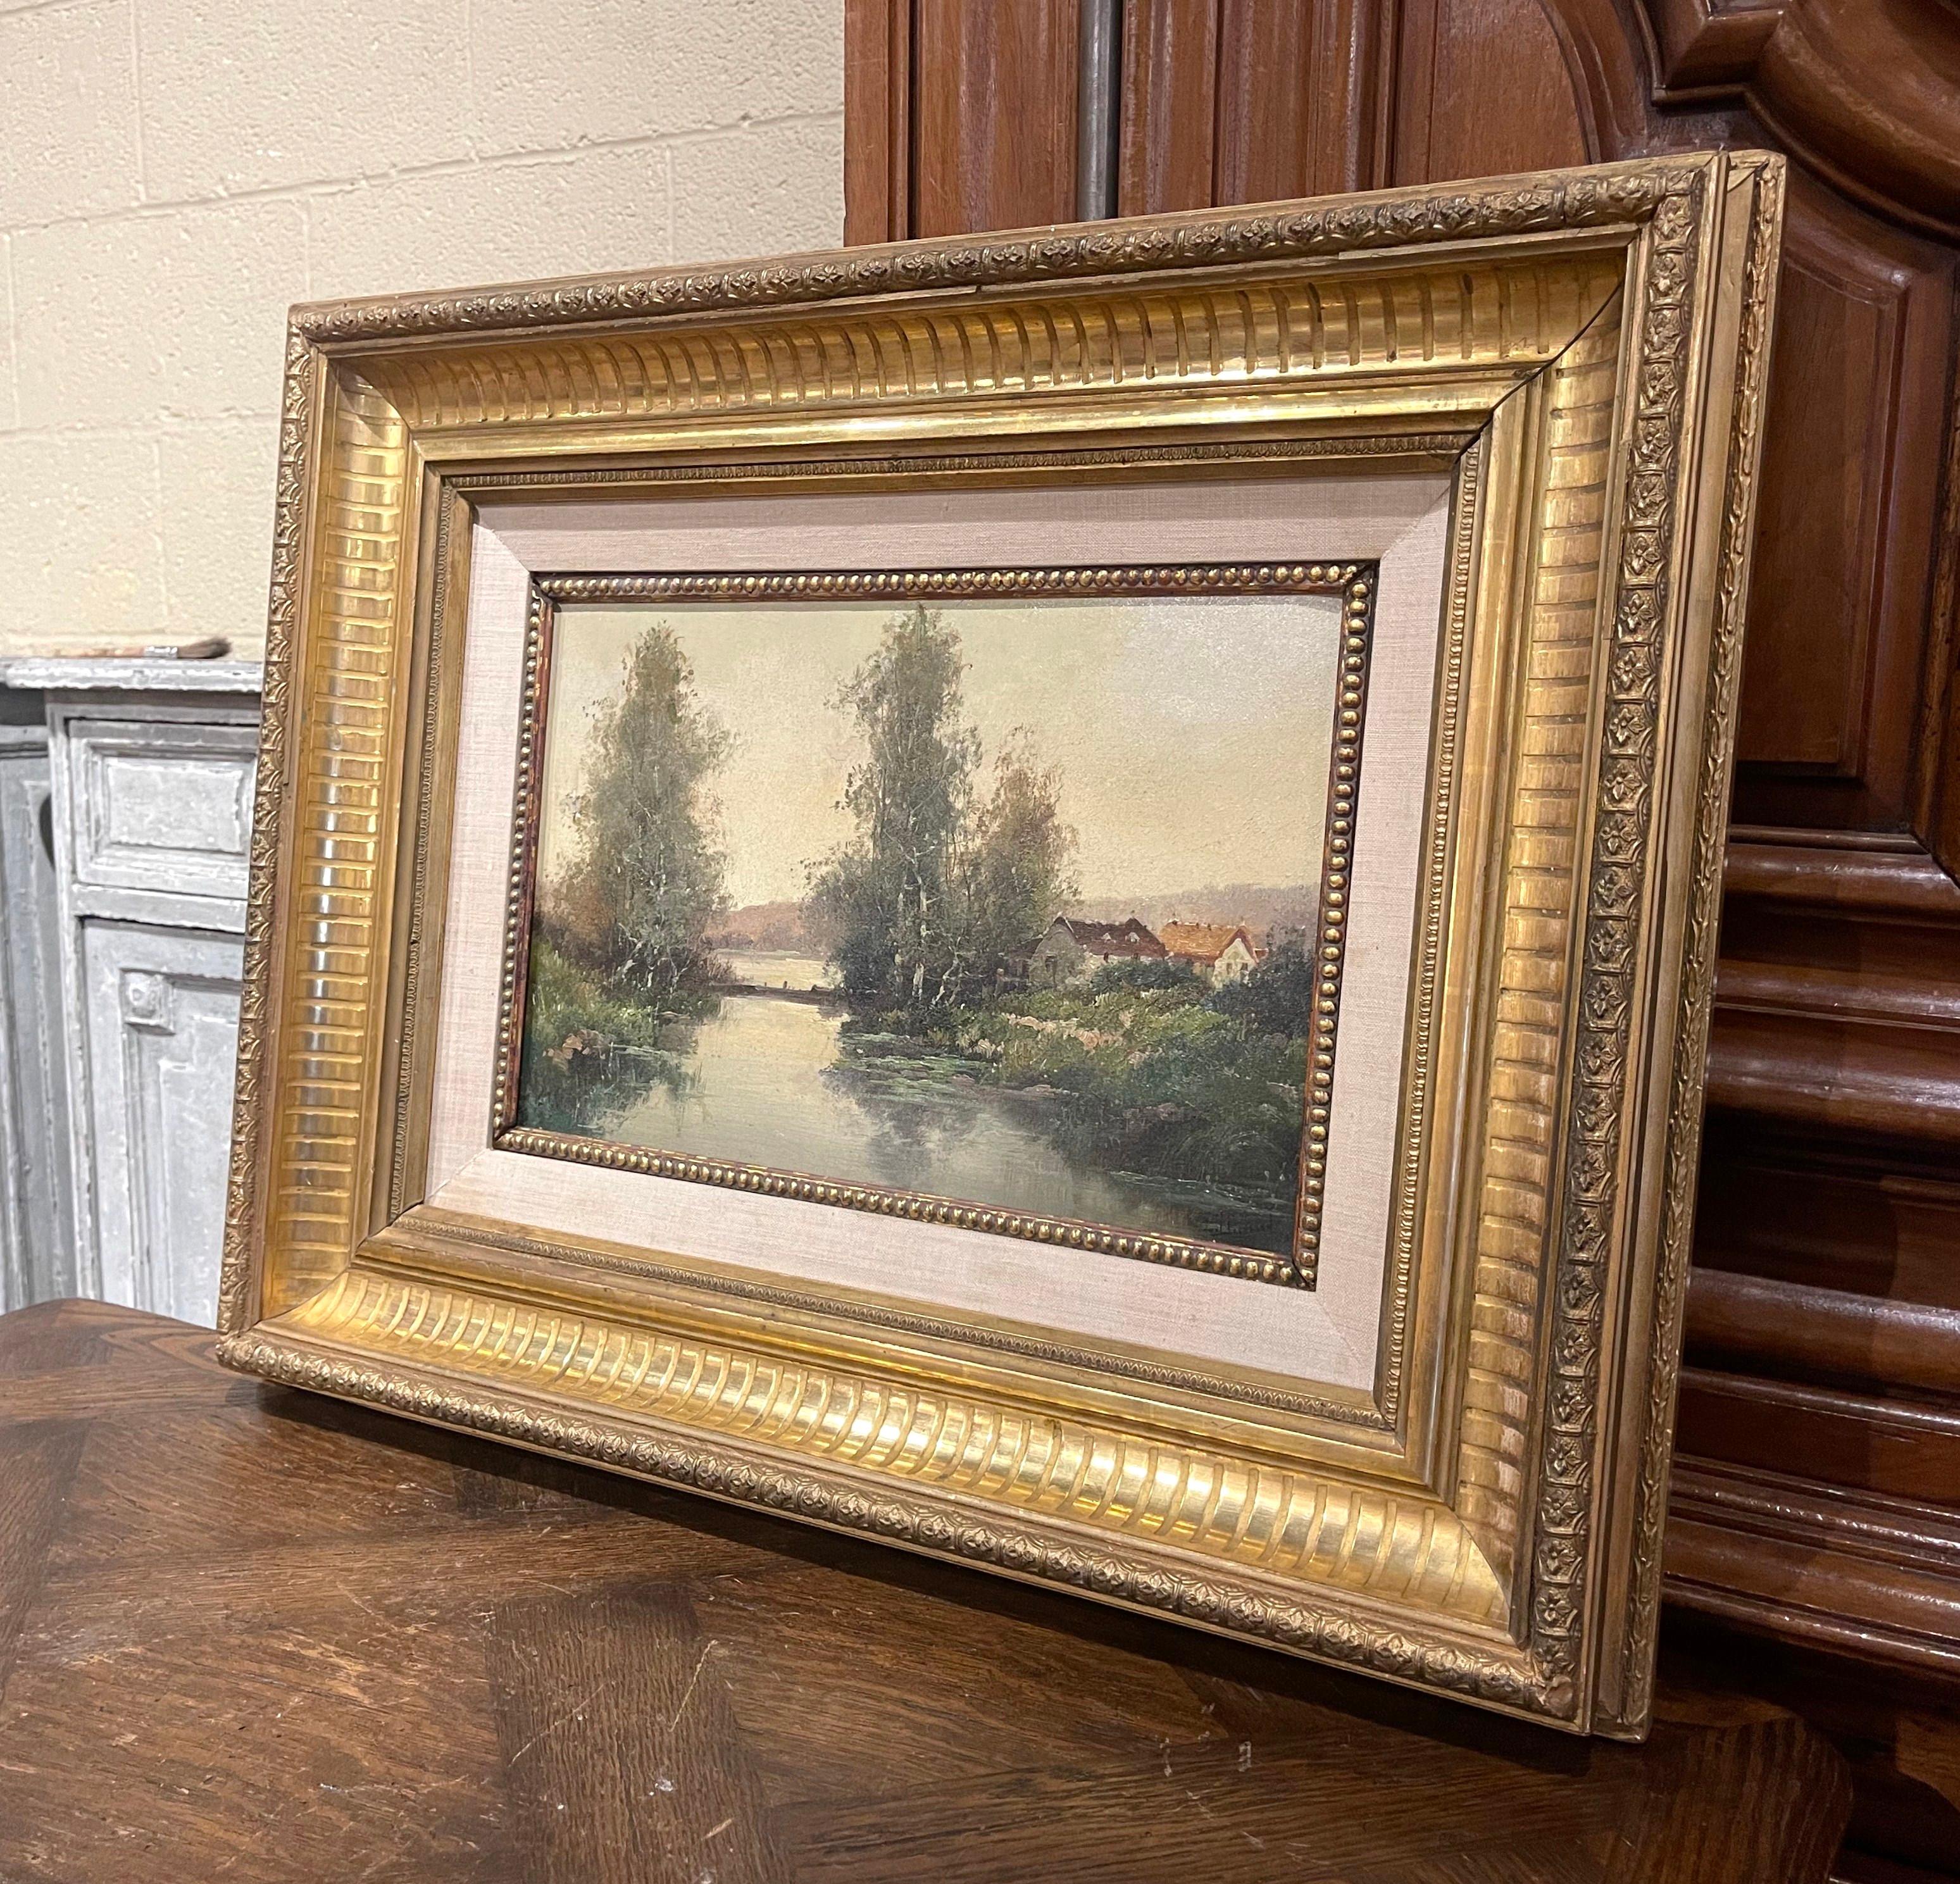 Decorate a study, living room or den with this beautiful and colorful antique painting! Painted in France circa 1890, the artwork on canvas is set in an exquisite carved gilt wood frame and illustrates a picturesque, countryside scene in rural